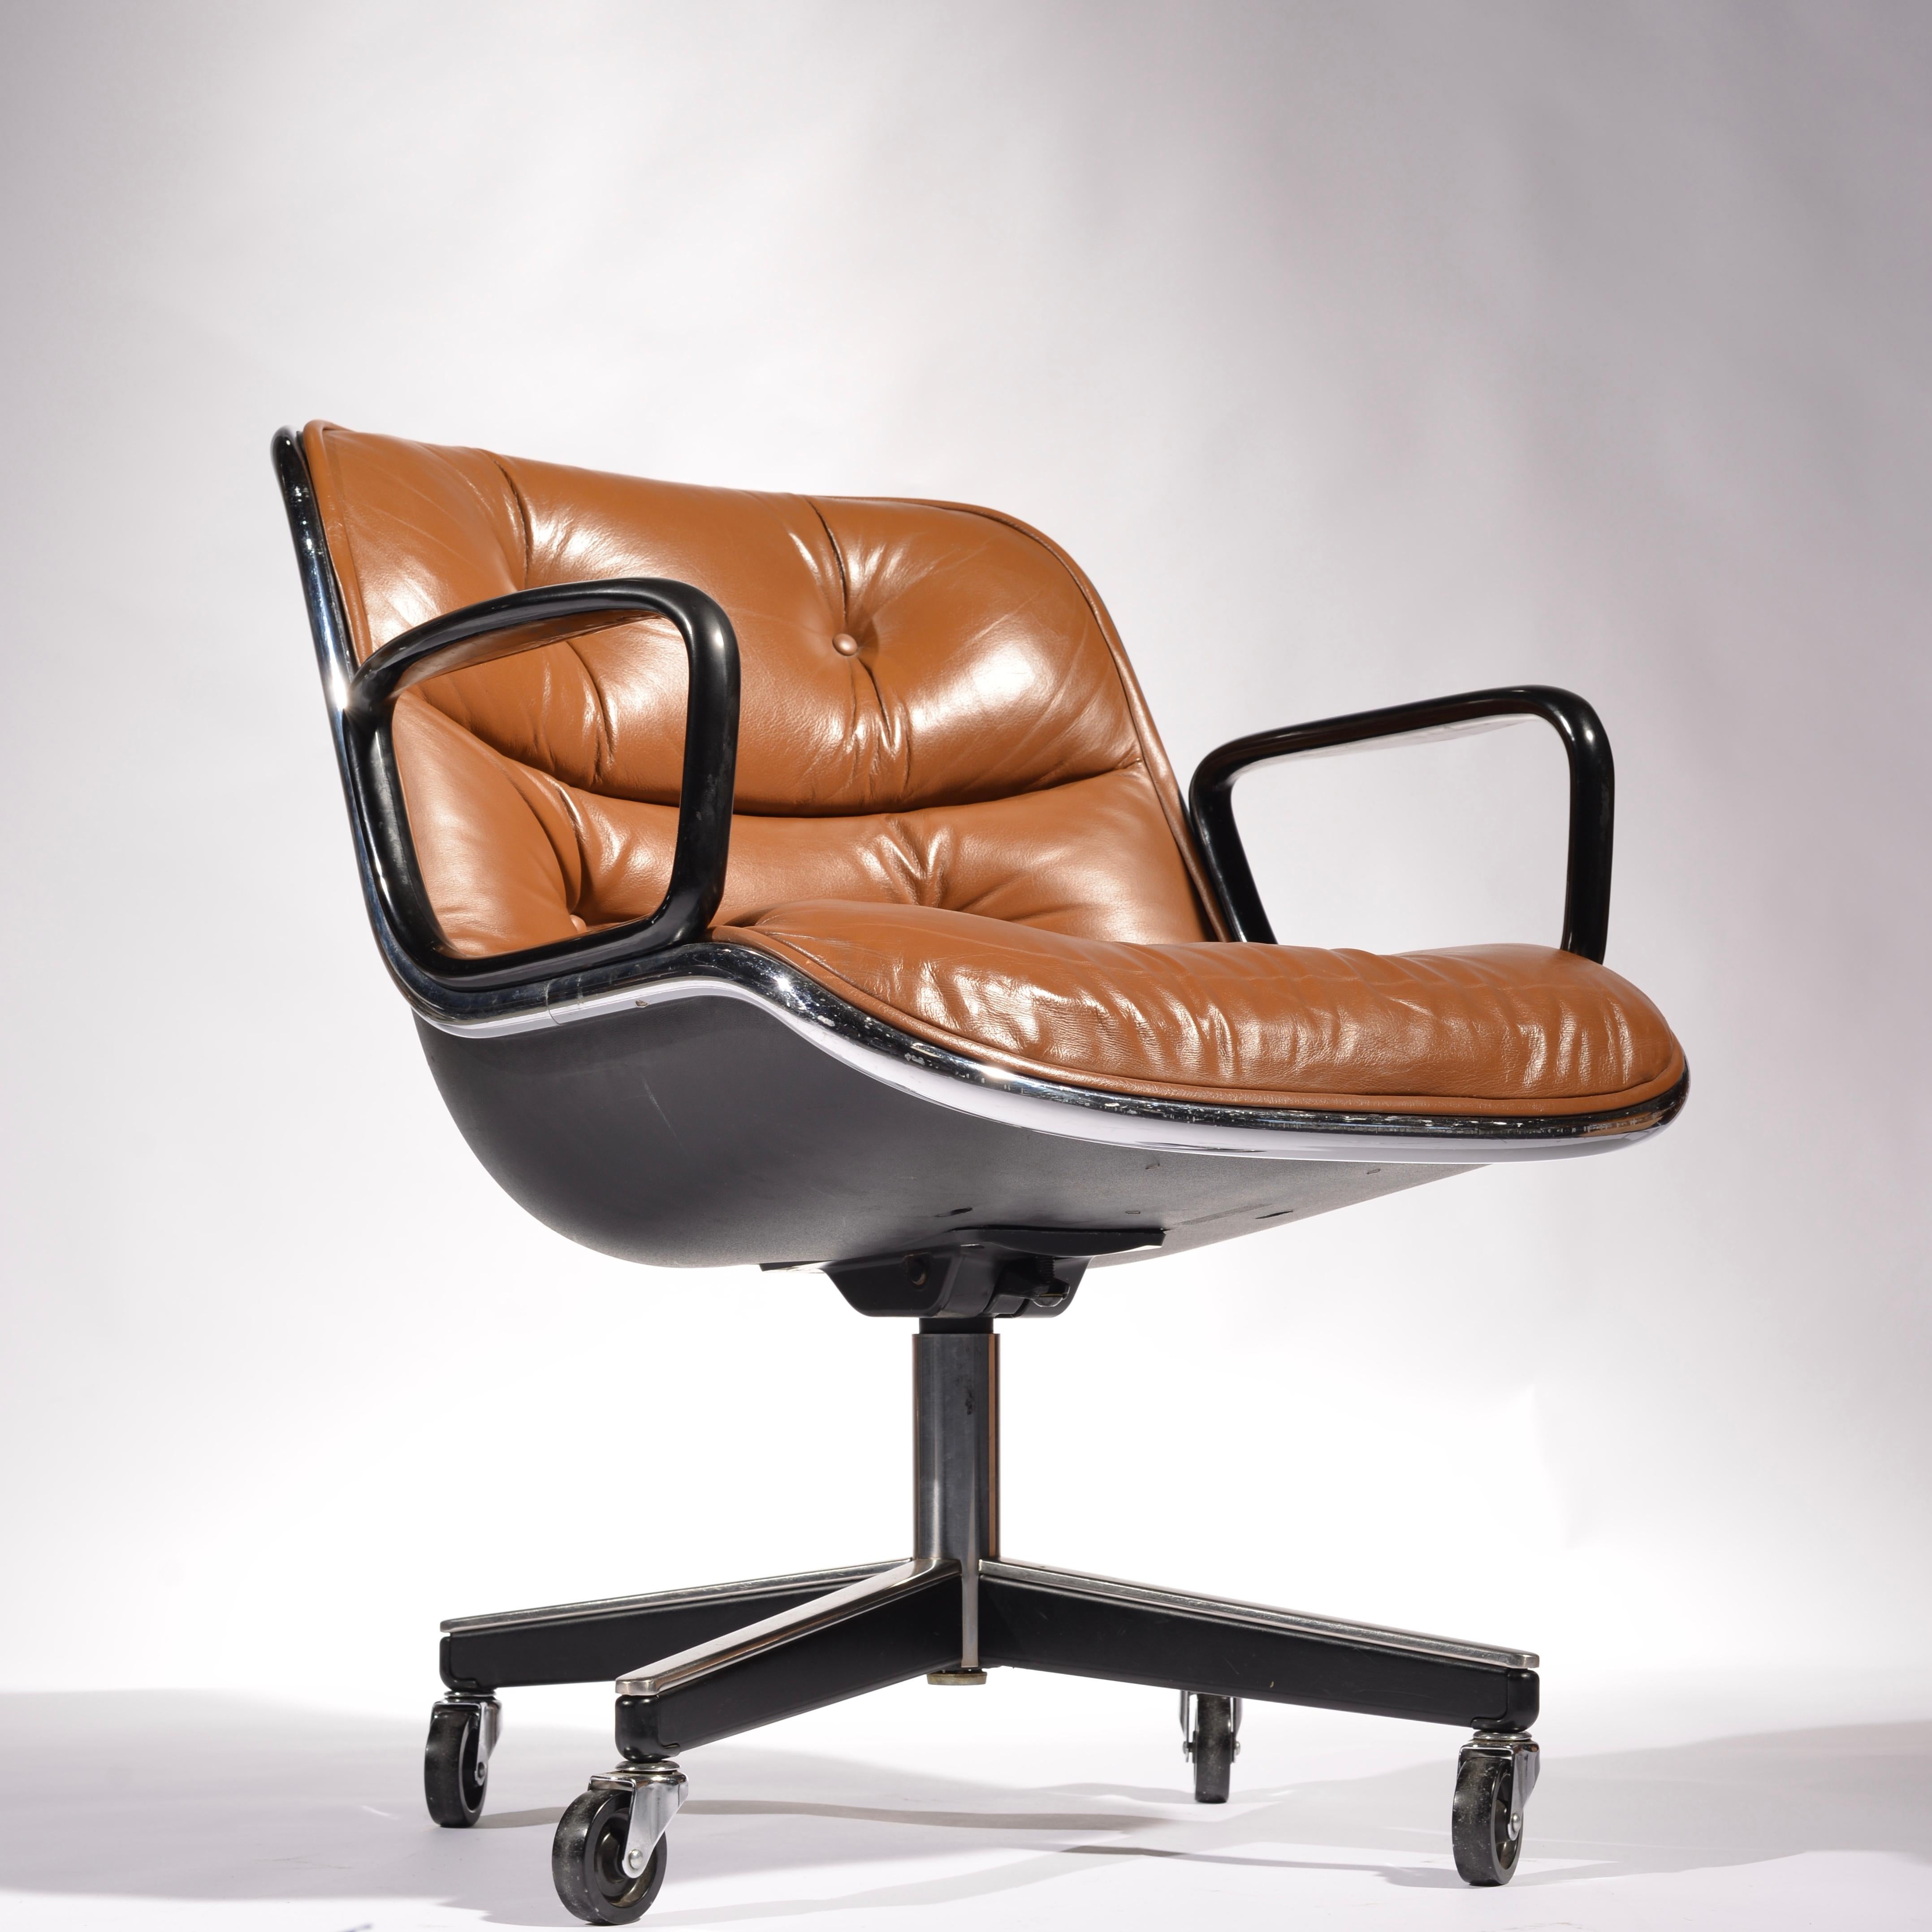 Mid-Century Modern 16 Charles Pollock Executive Desk Chairs for Knoll in Cognac Leather